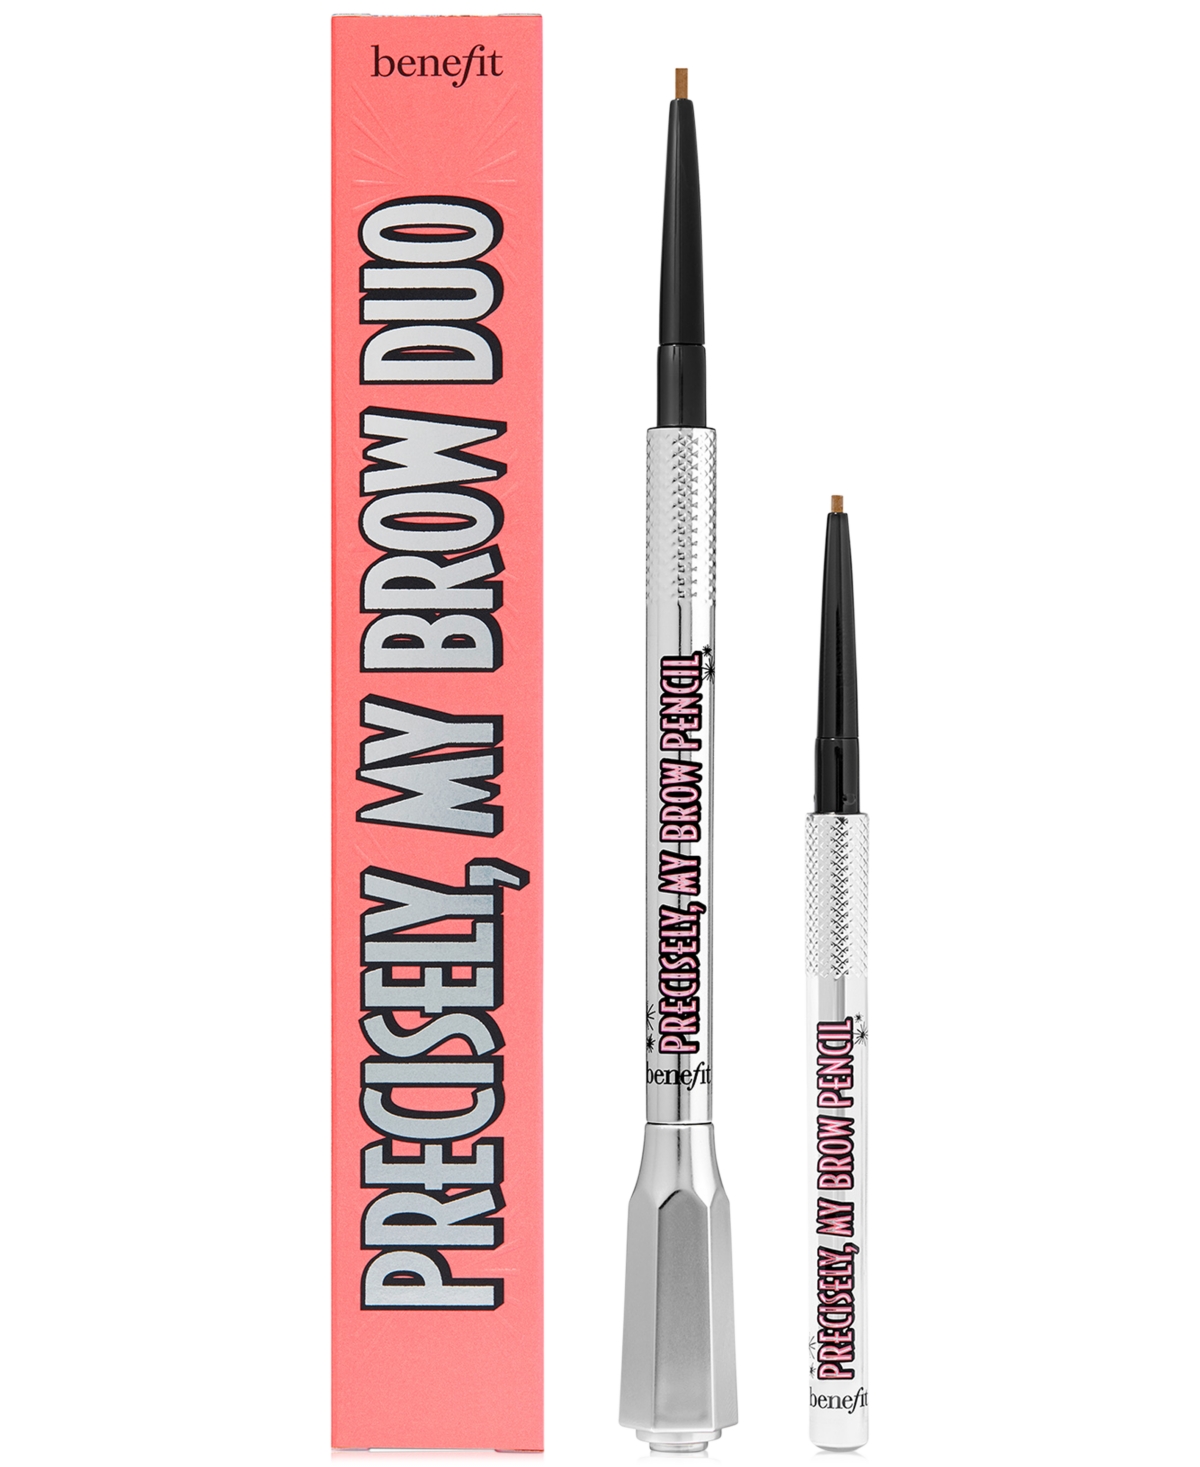 Benefit Cosmetics 2-pc. Precisely, My Brow Defining Eyebrow Pencil Set In Warm Golden Blonde